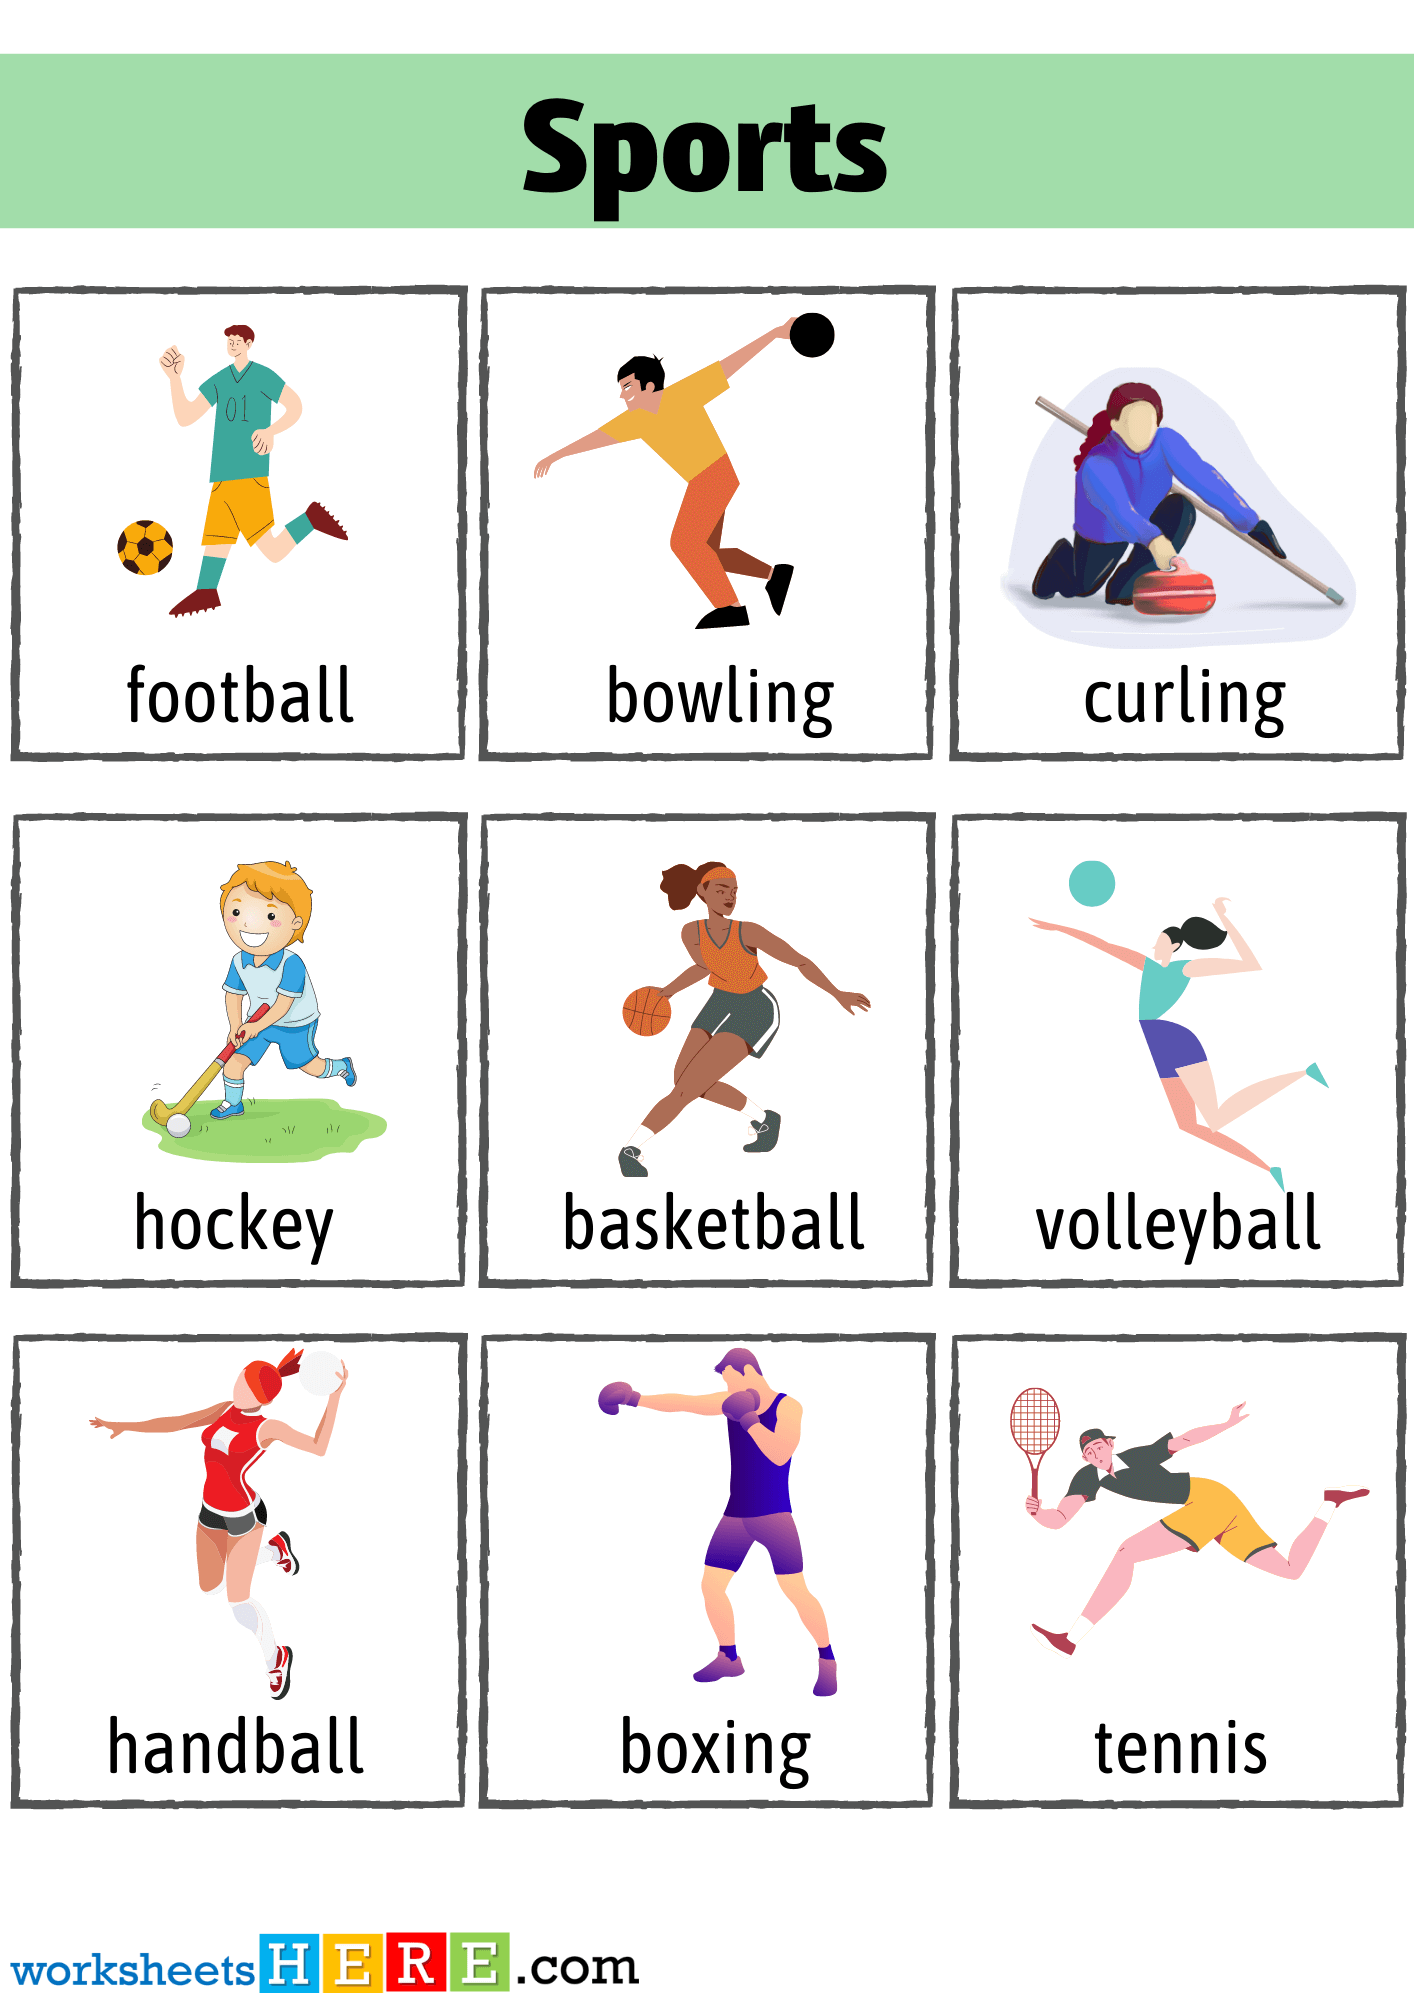 Sports Flashcards, +150 Sports Words Names with Pictures Worksheets